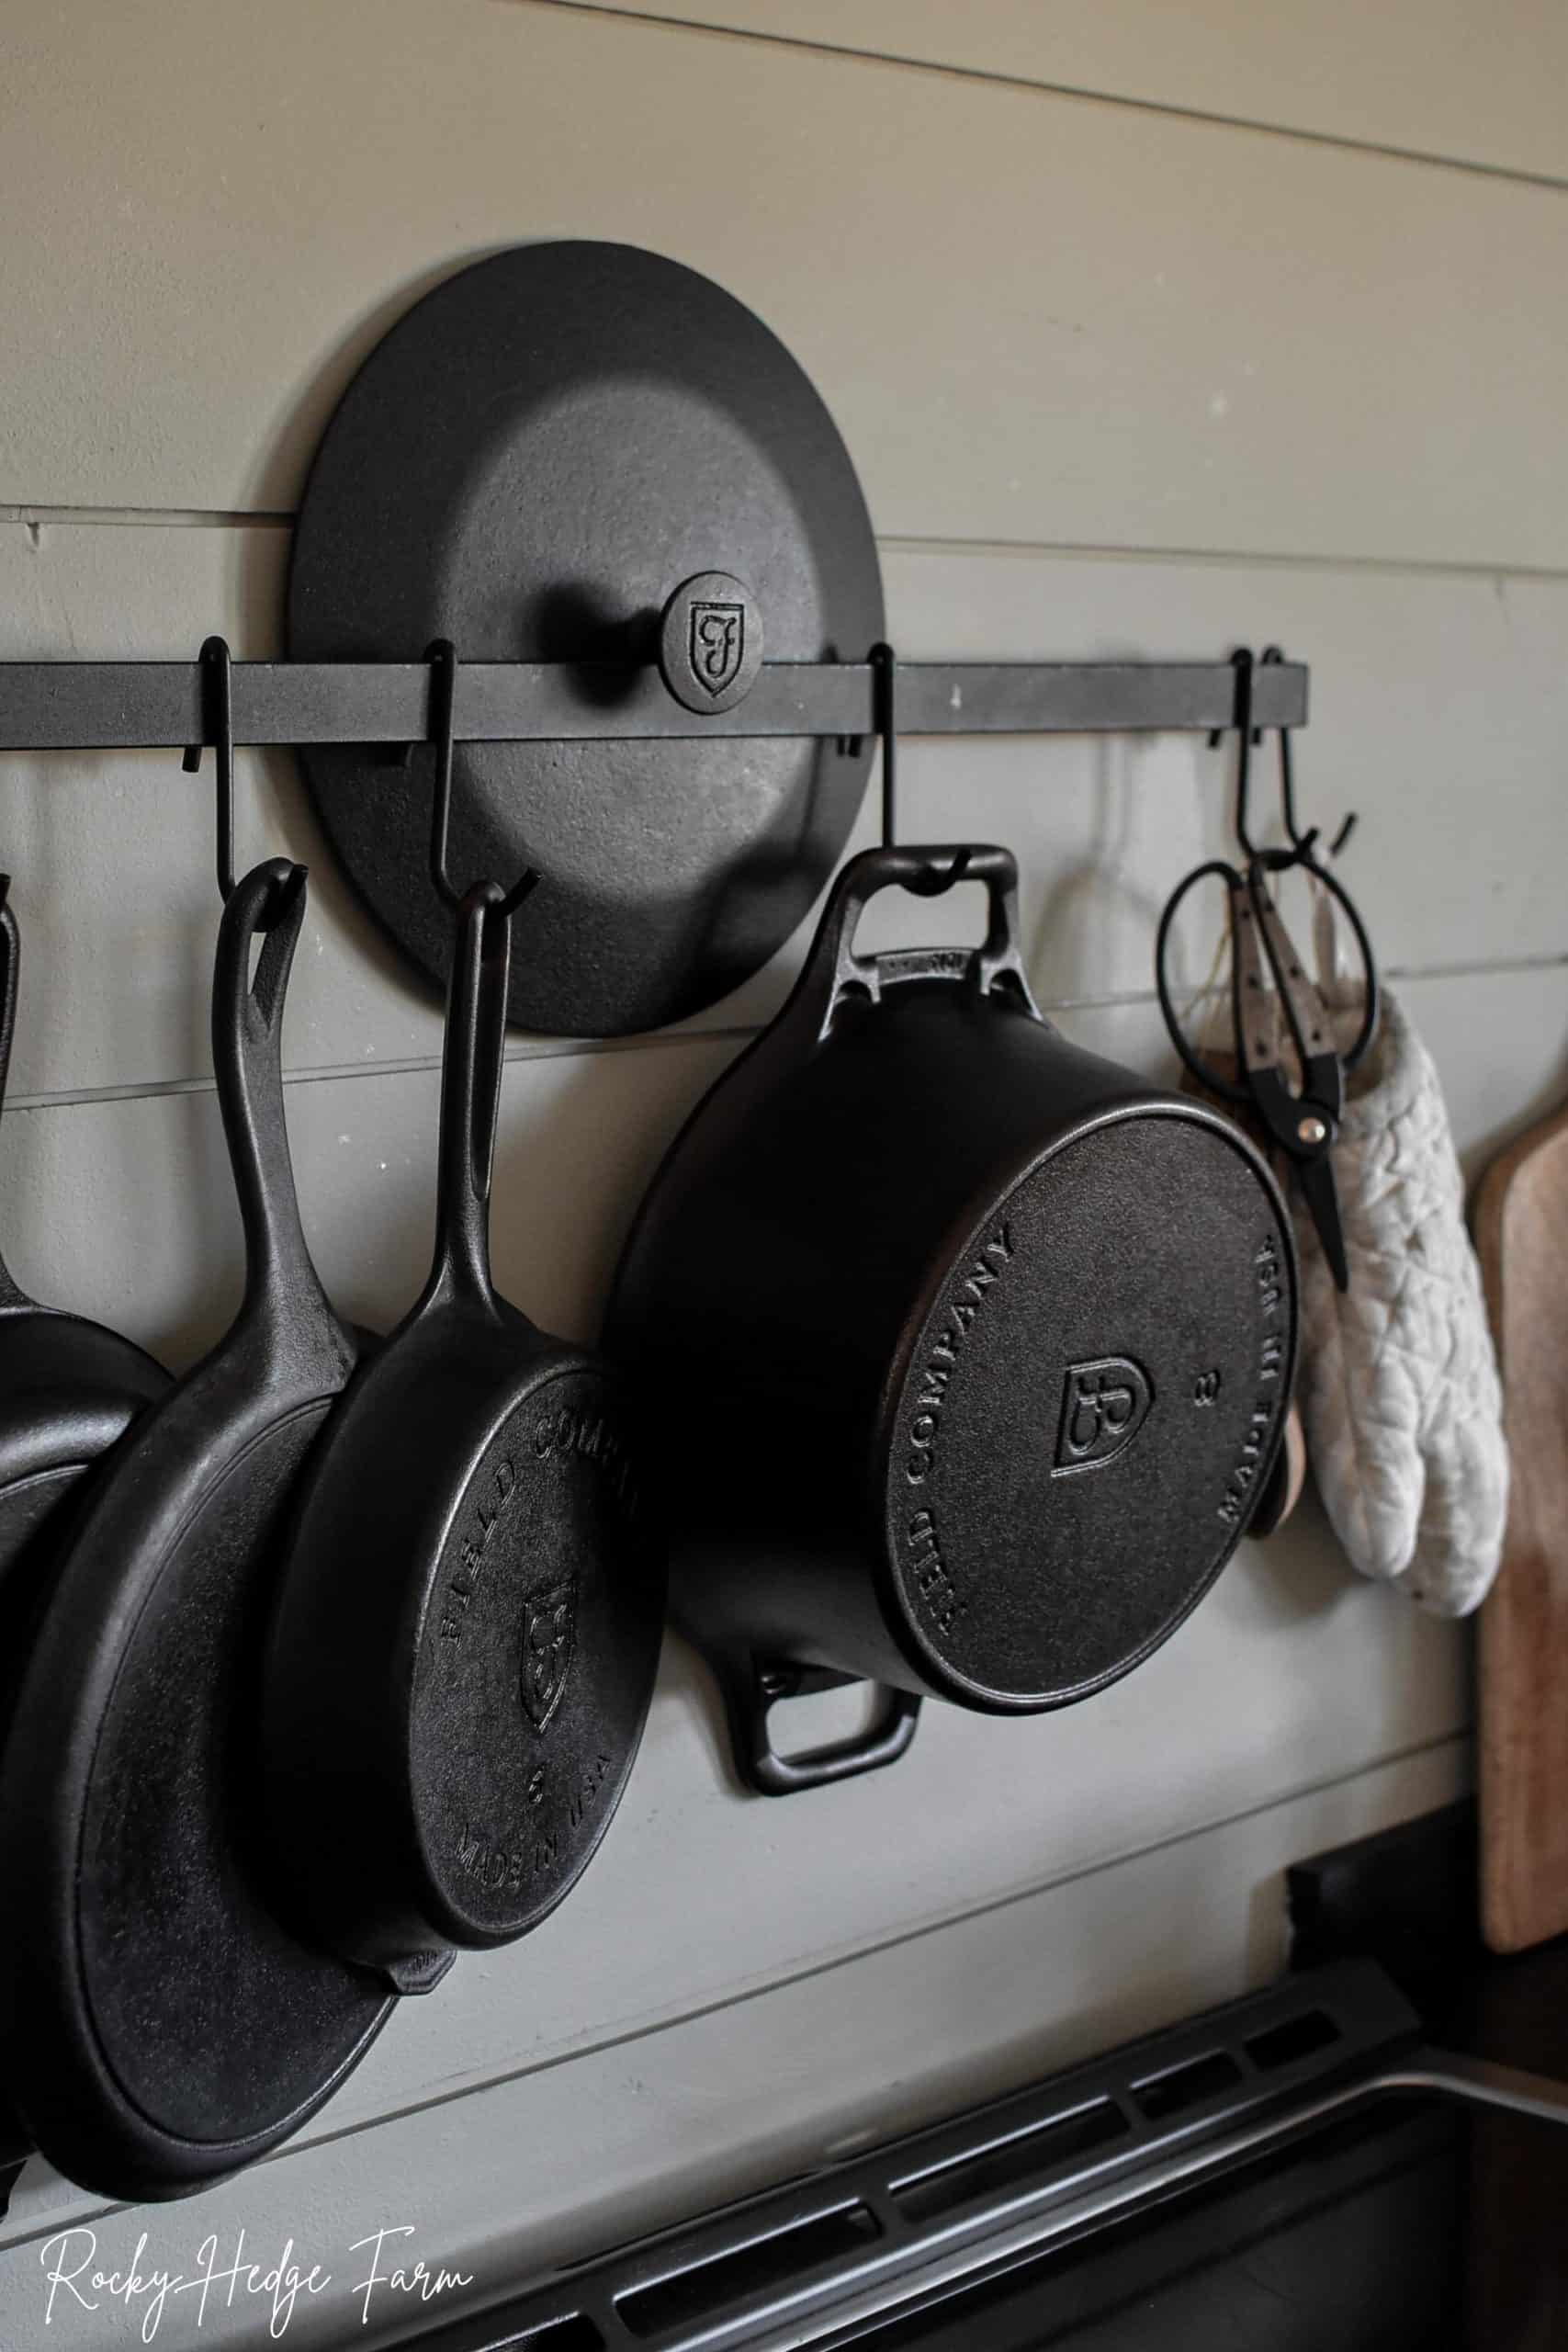 Cast iron skillet countertop caddy